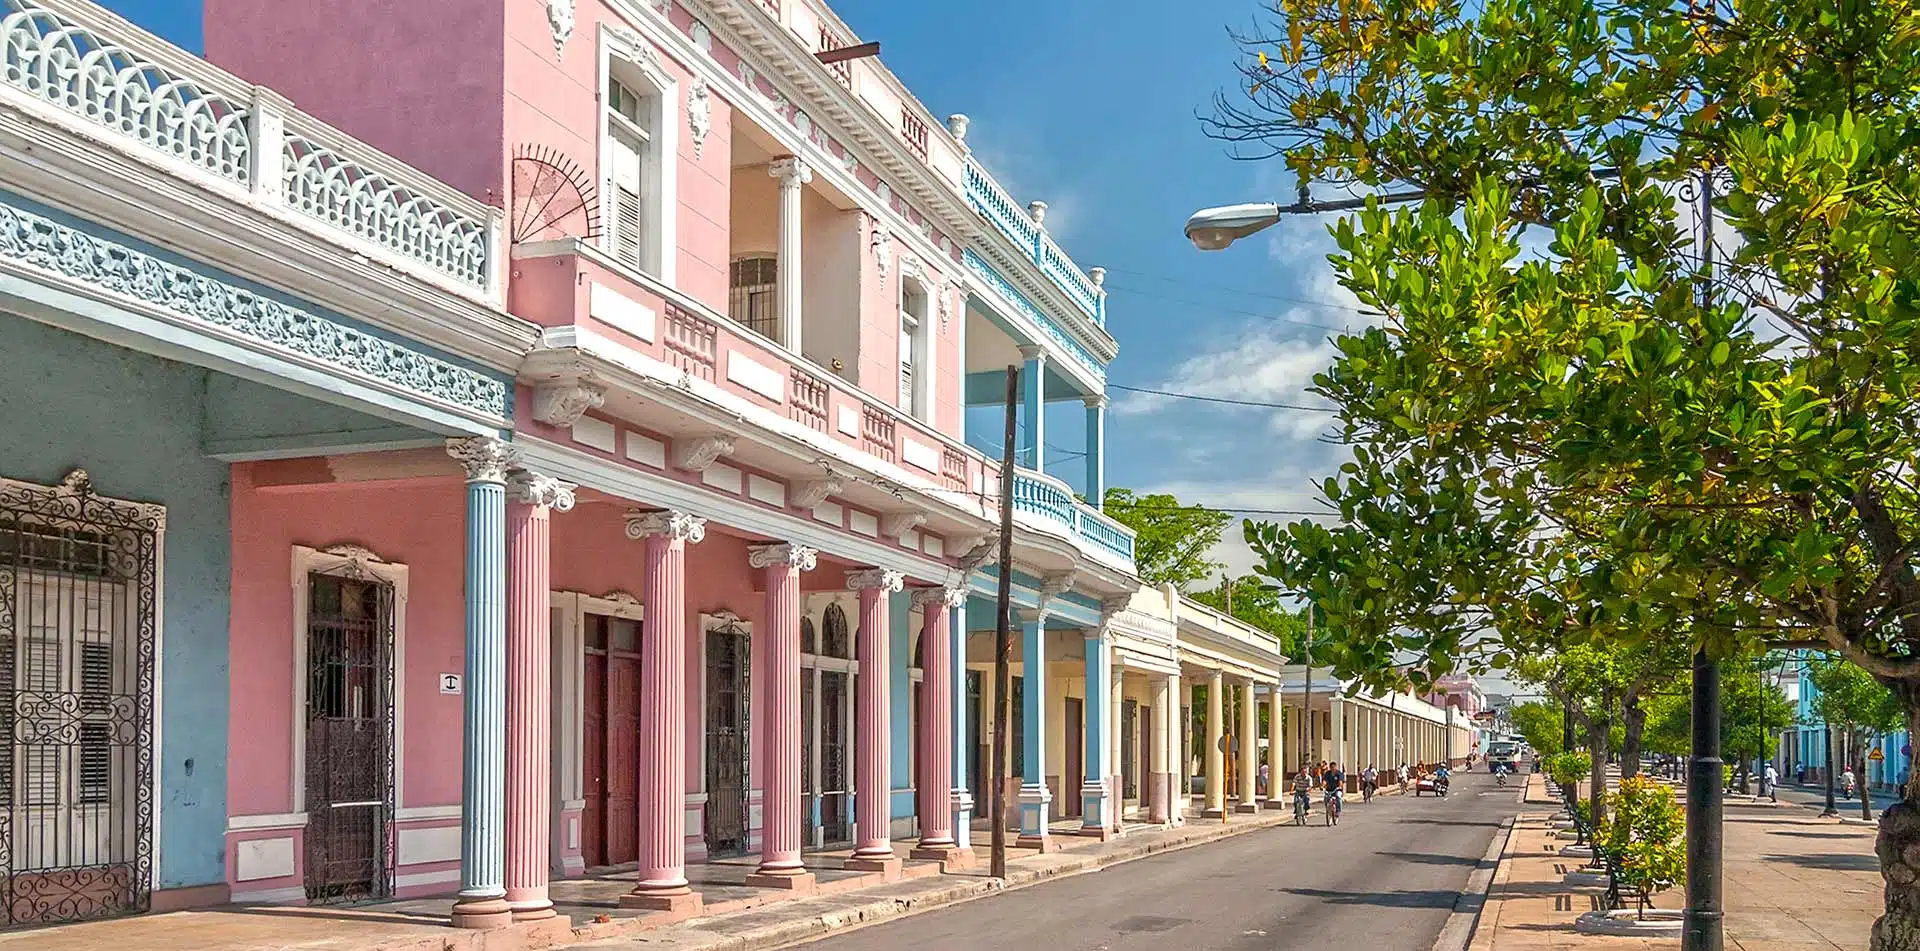 Walk through colorful and charming Cienfuegos, with its 18th-century French quarter architecture